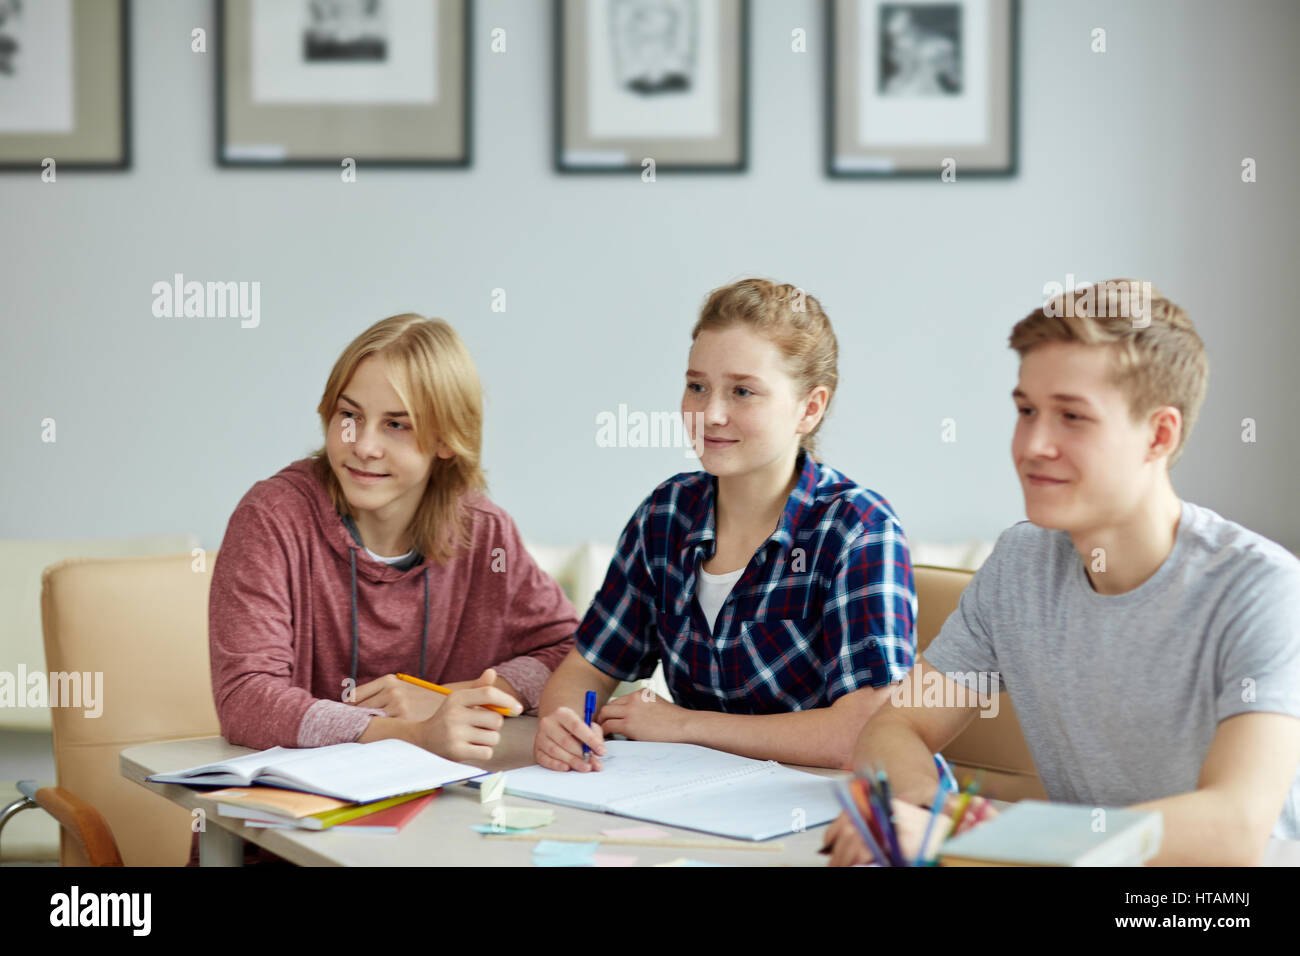 group-of-students-paying-attention-to-speech-of-teacher-stock-photo-alamy